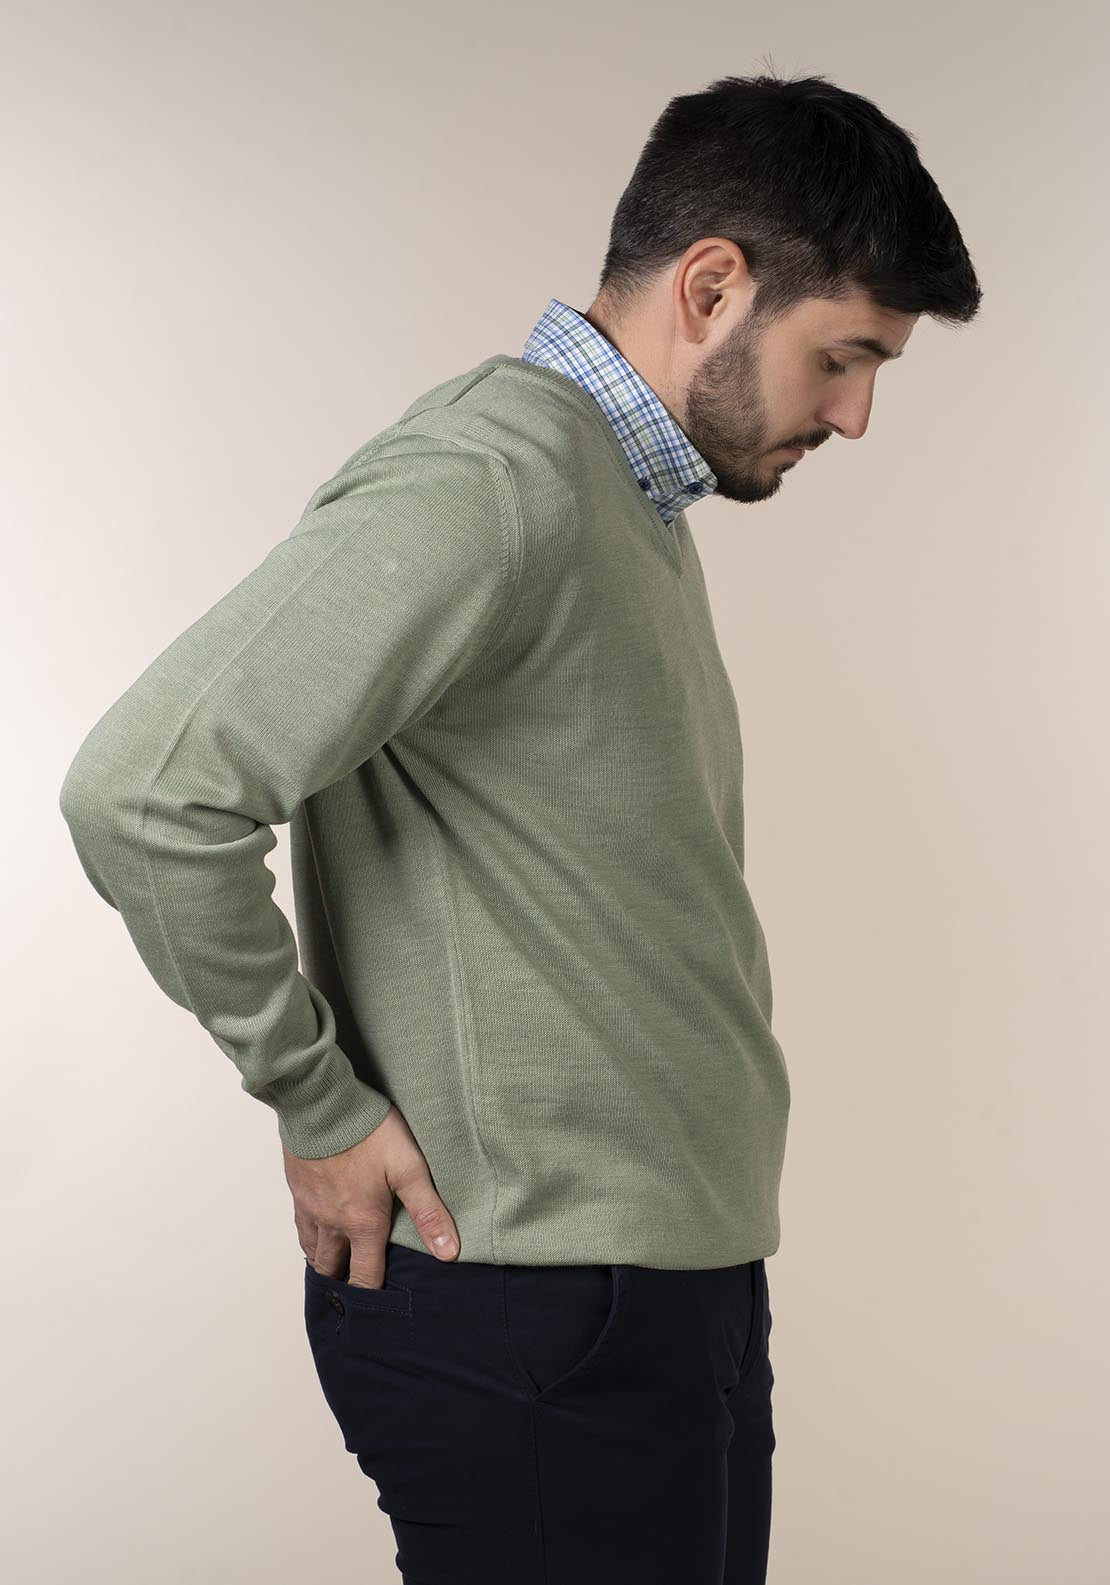 Yeats Mens 100% Cotton V-Neck Jumper 4 Shaws Department Stores